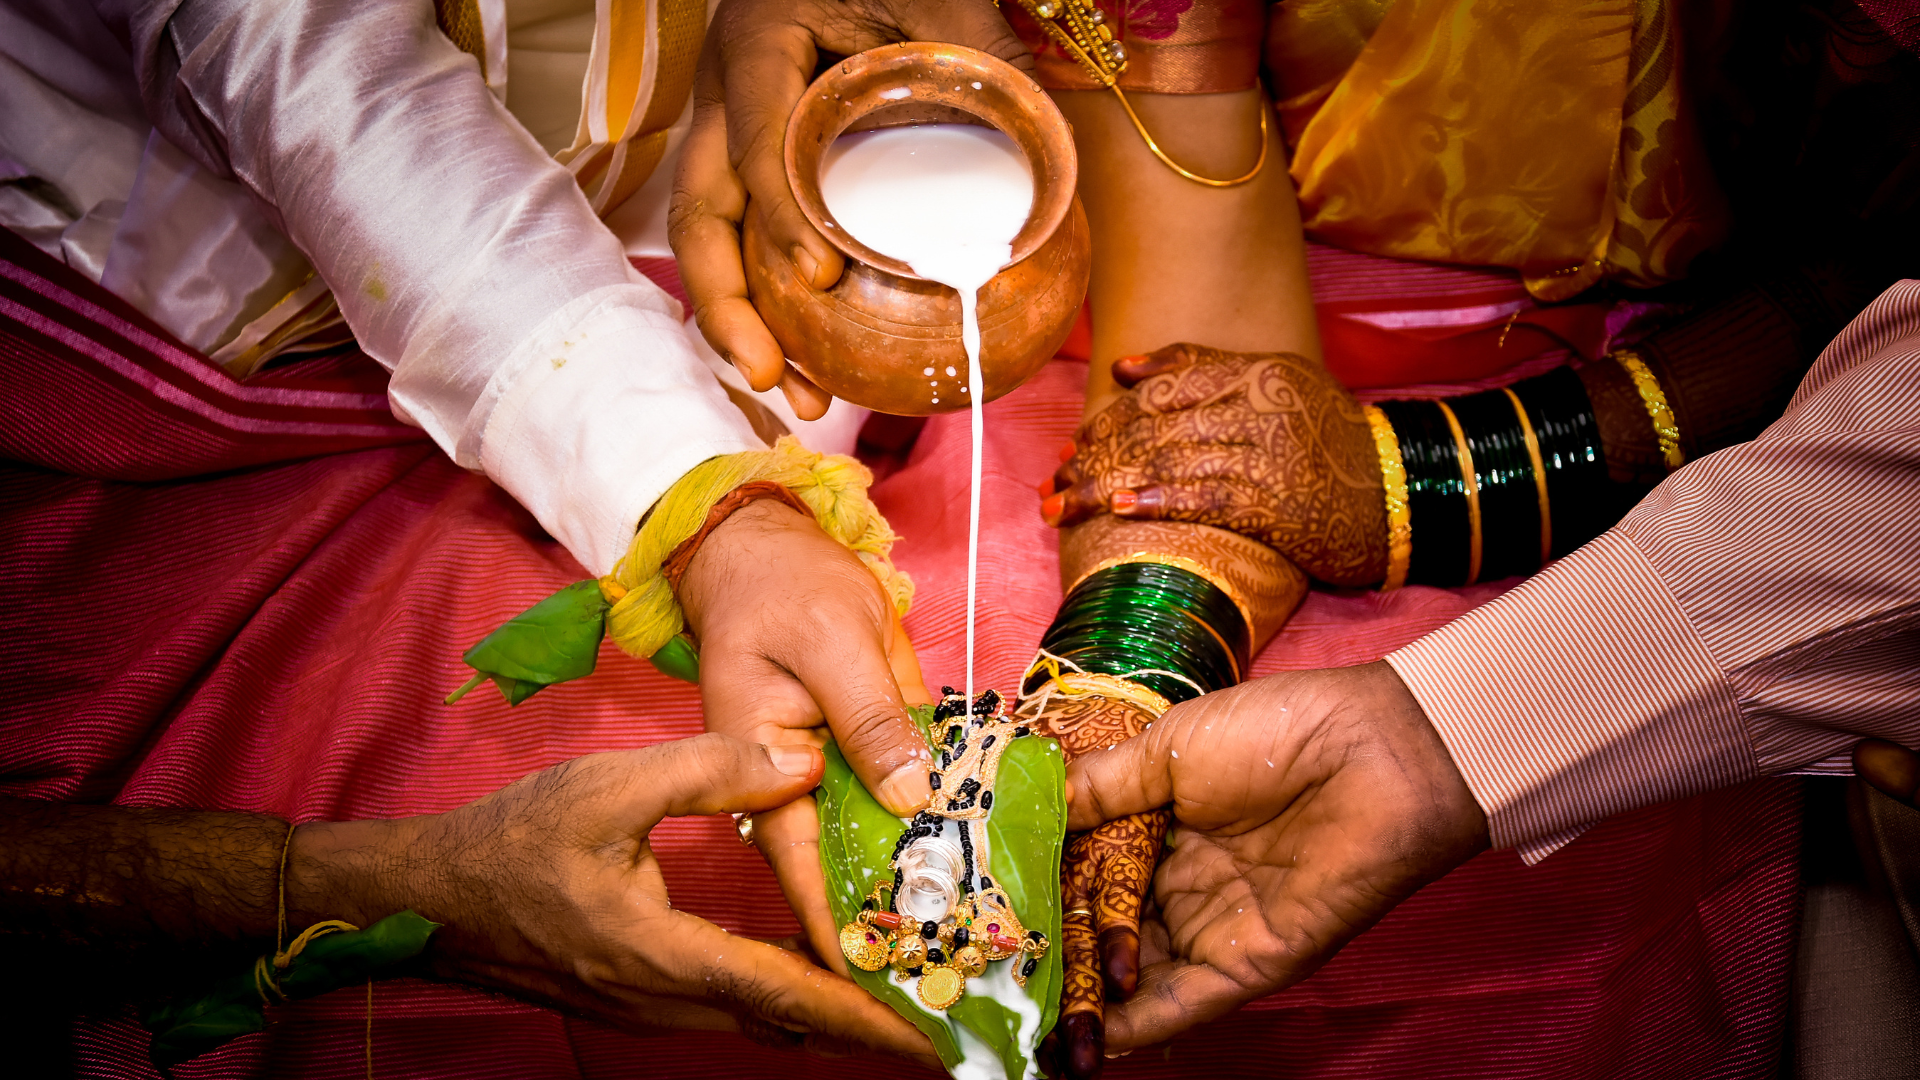 Wedding tradition indian wedding tradition wedding malaysia wedding couple how to plan a indian wedding what is indian wedding traditions indian wedding guidelines